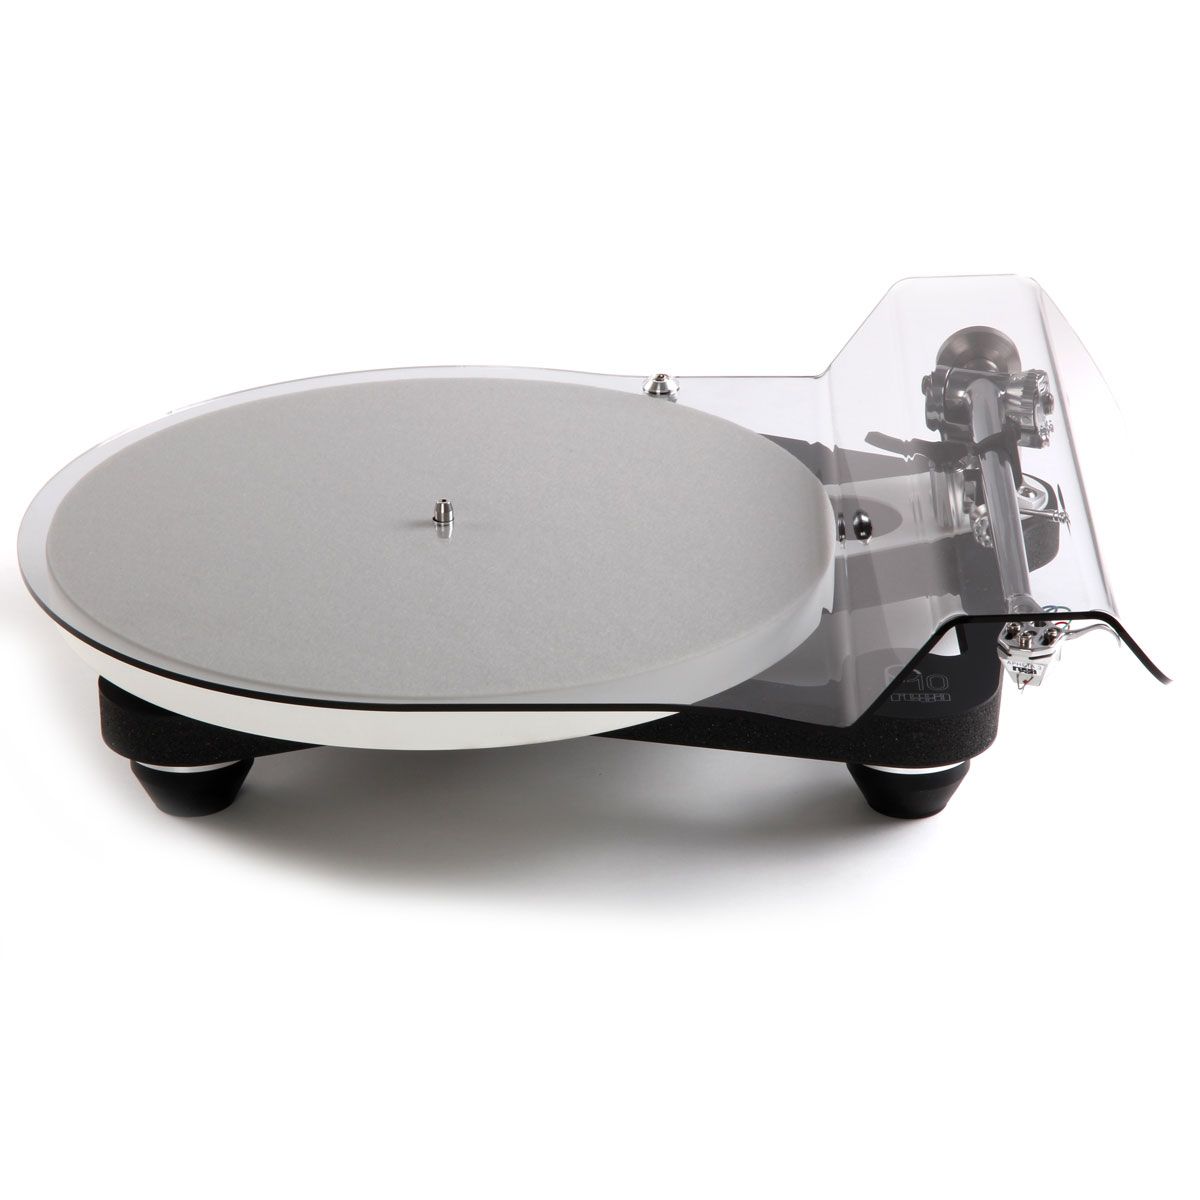 Rega Planar 10 Turntable black front view with dustcover